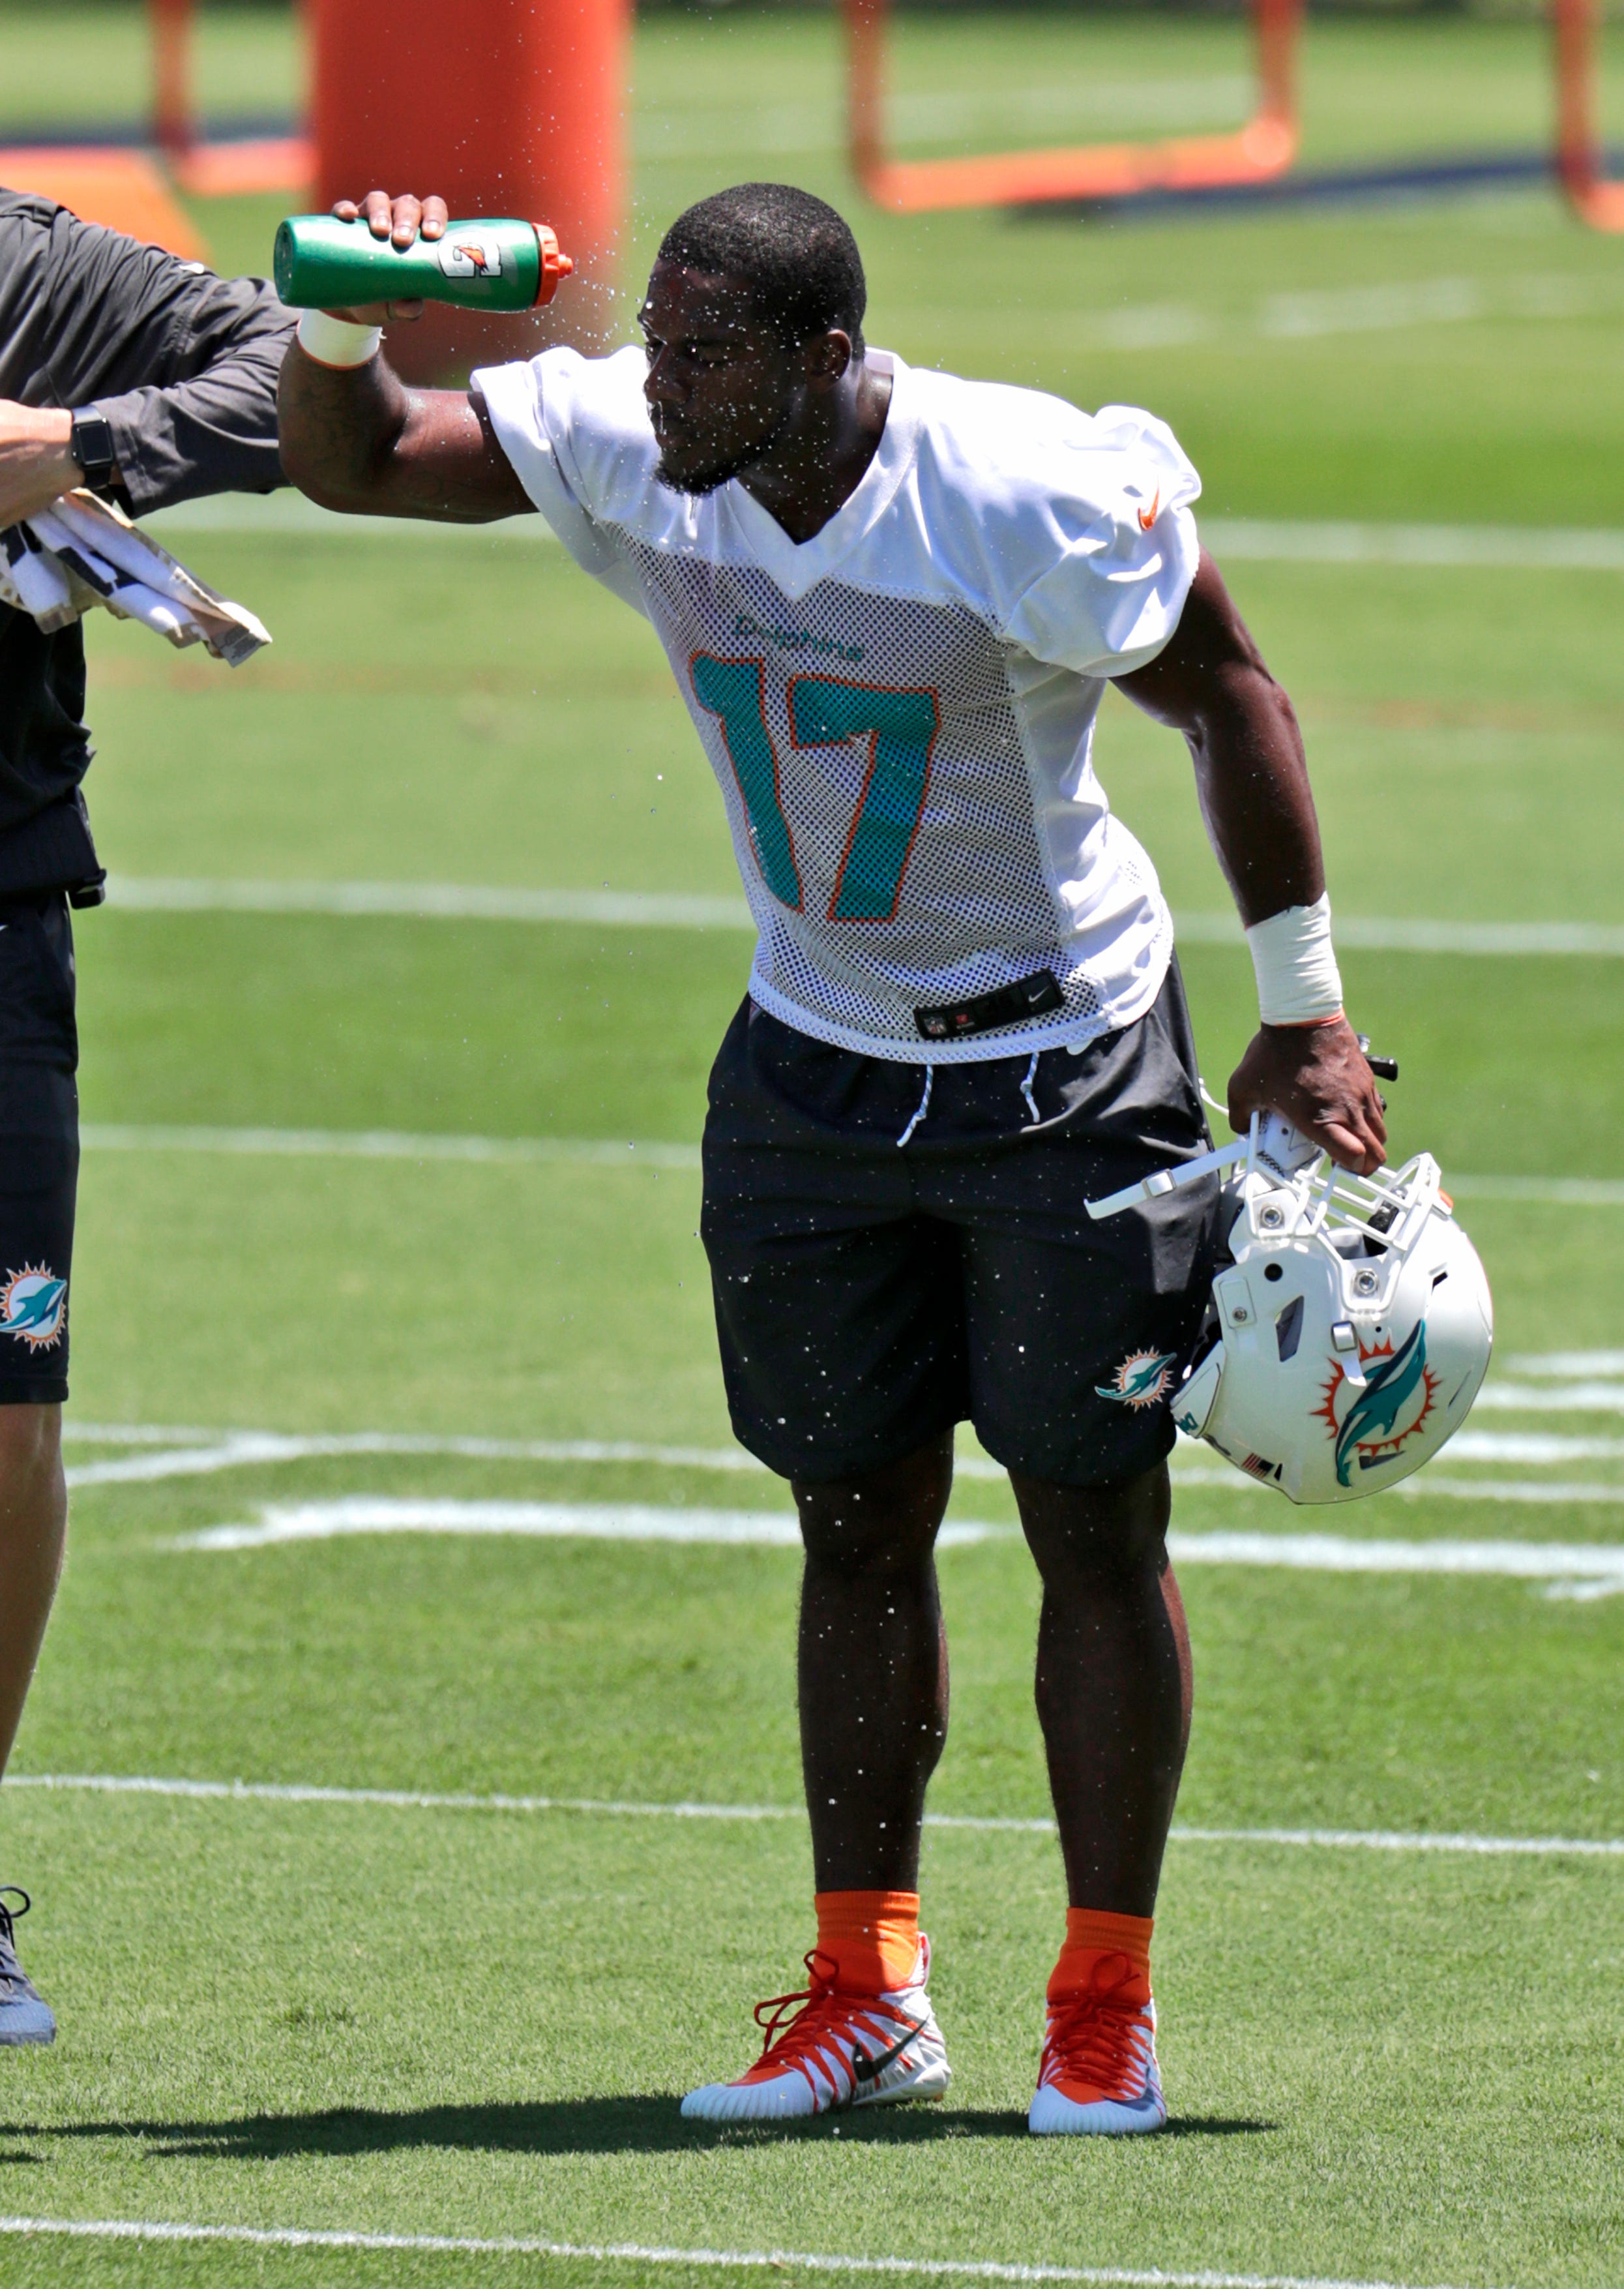 Following arrests, Walton gets another chance with Dolphins